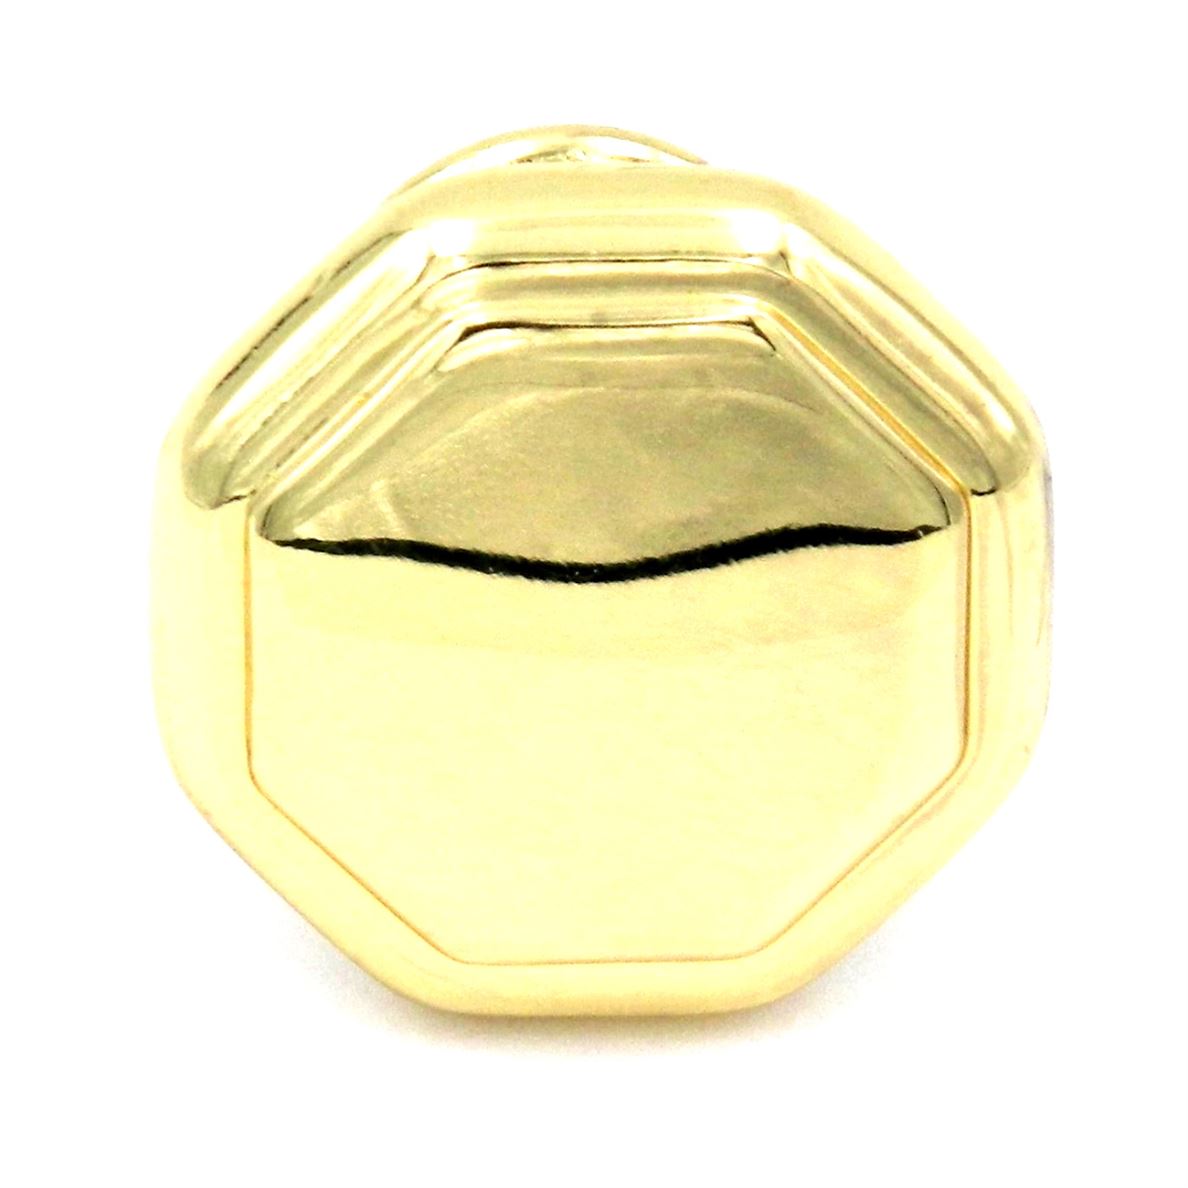 P14004-3 Polished Brass 1 1/8" Octagon Cabinet Knobs Belwith Hickory Conquest